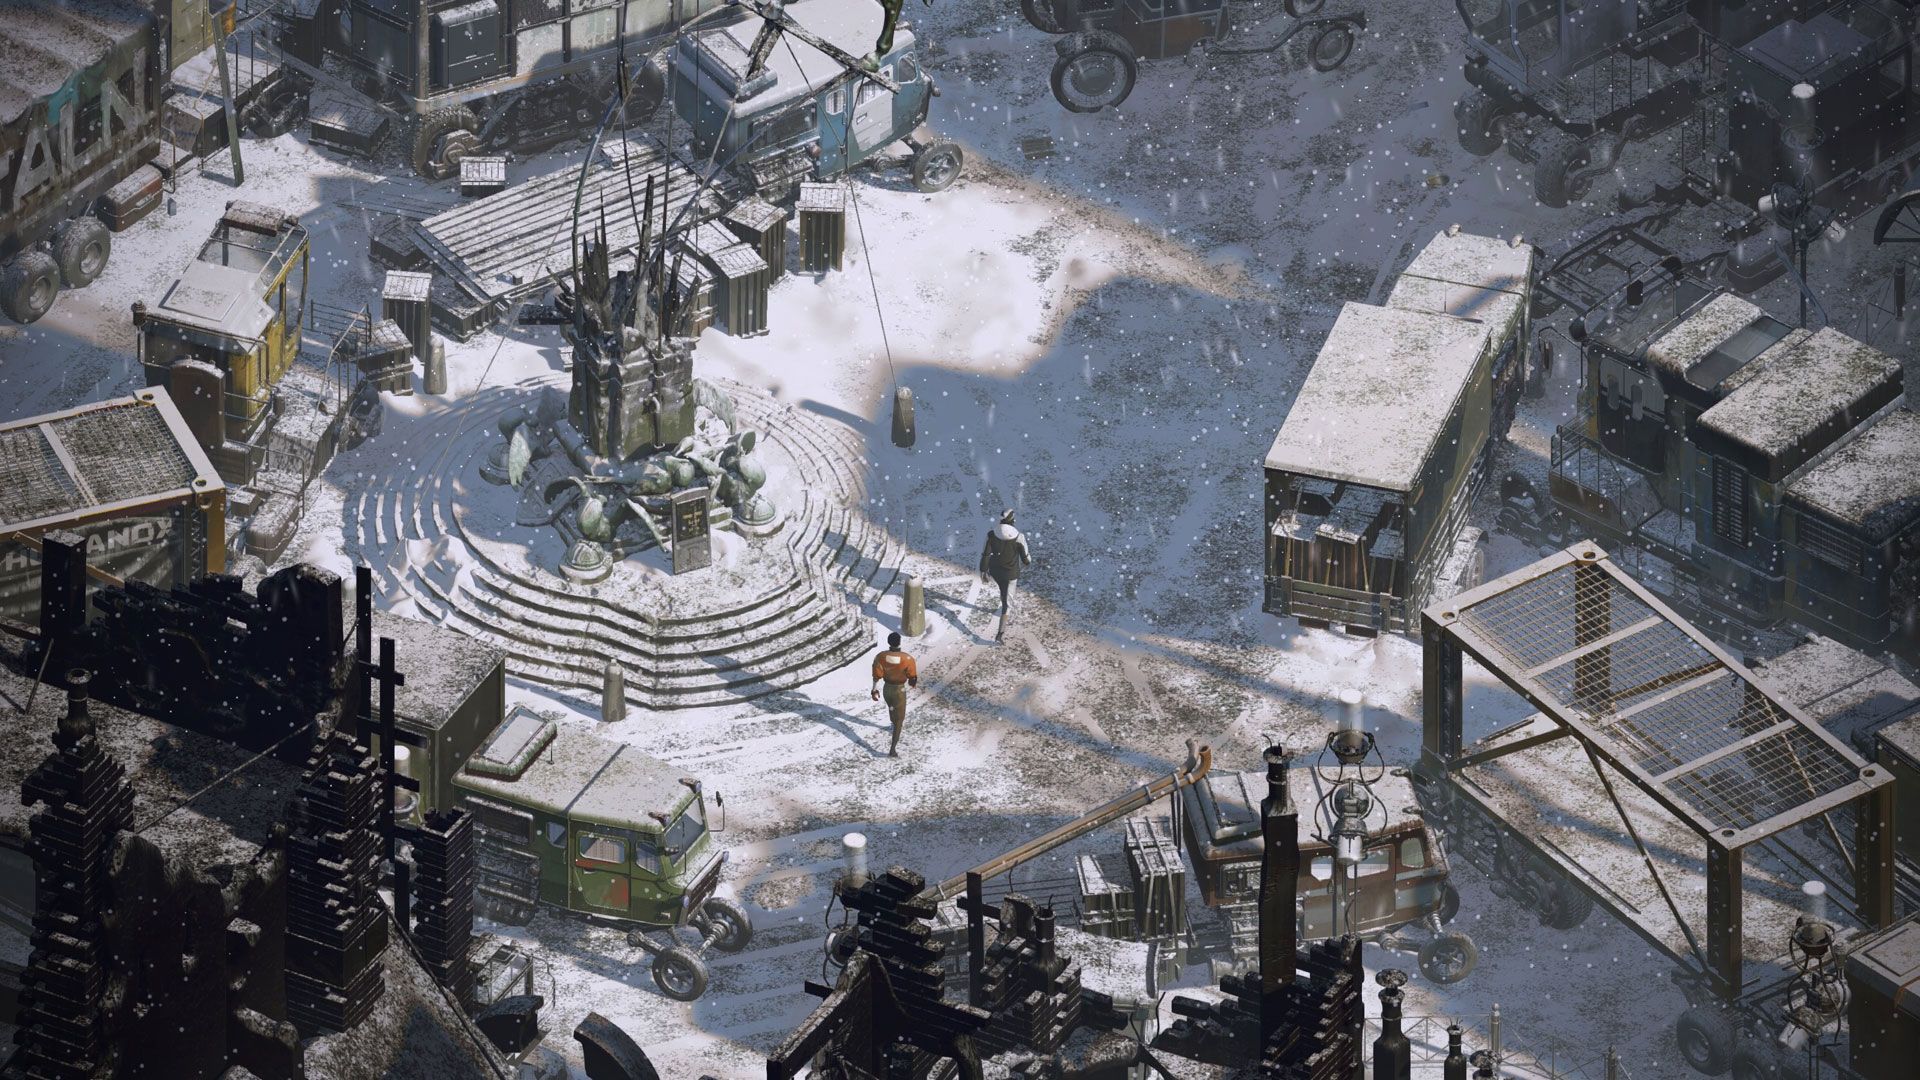 Disco Elysium will be on Xbox One and PS4 in 2020